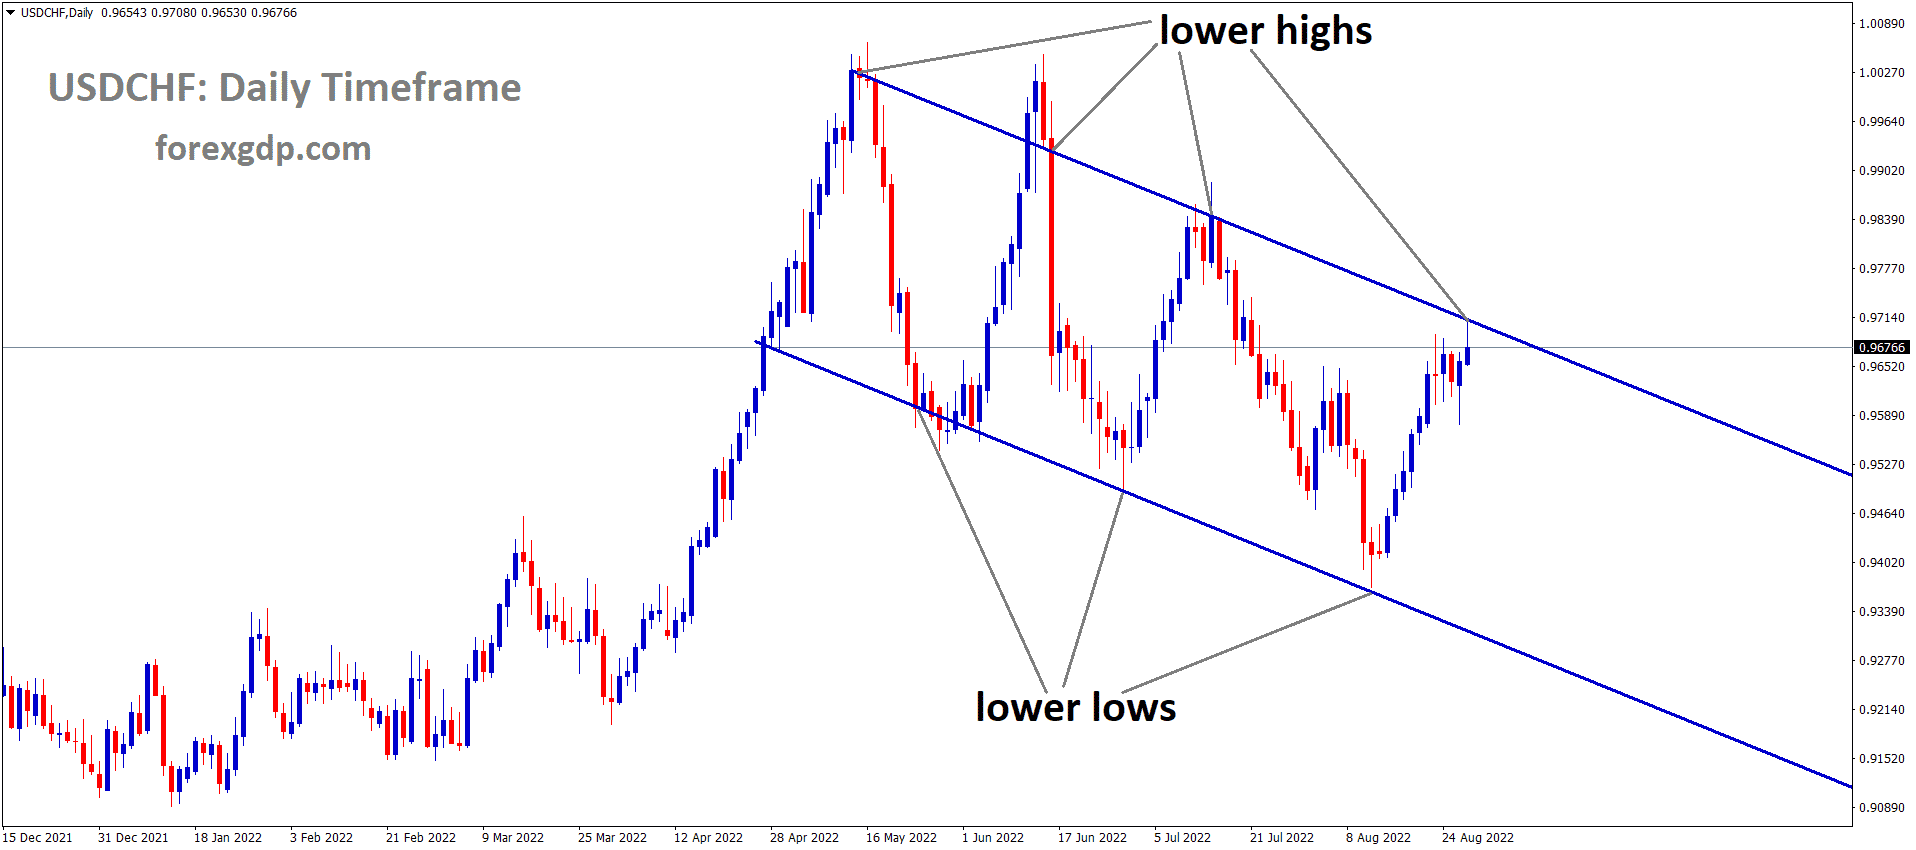 USDCHF is moving in the Descending channel and the Market has reached the Lower high area of the channel 2